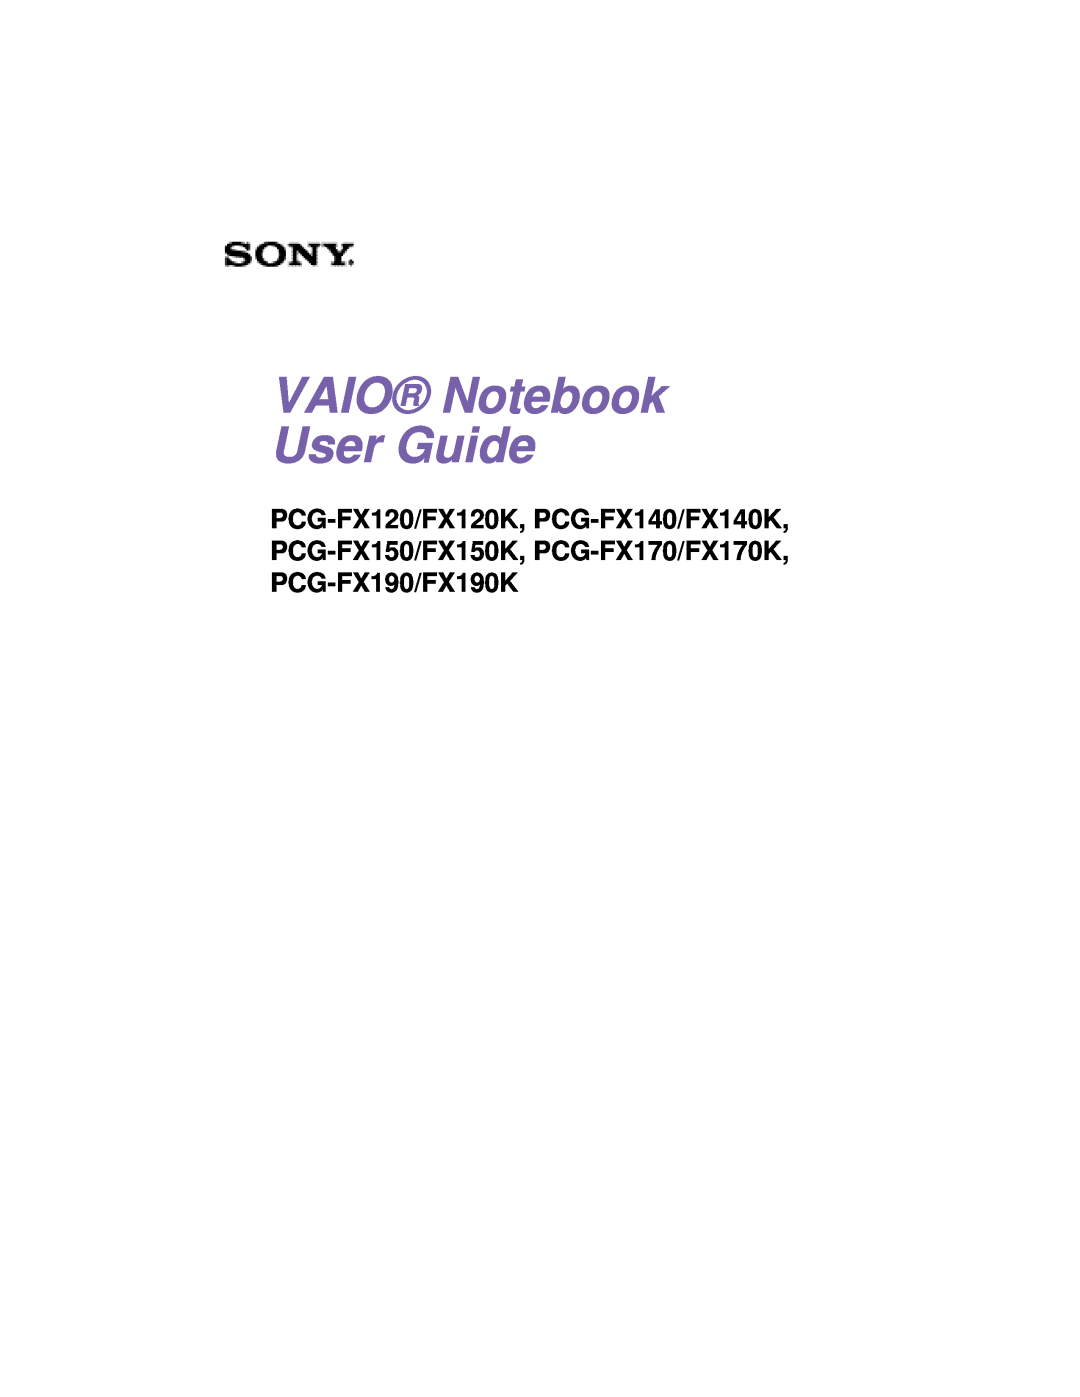 Sony manual VAIO Notebook User Guide, PCG-FX120/FX120K, PCG-FX140/FX140K PCG-FX150/FX150K, PCG-FX170/FX170K 